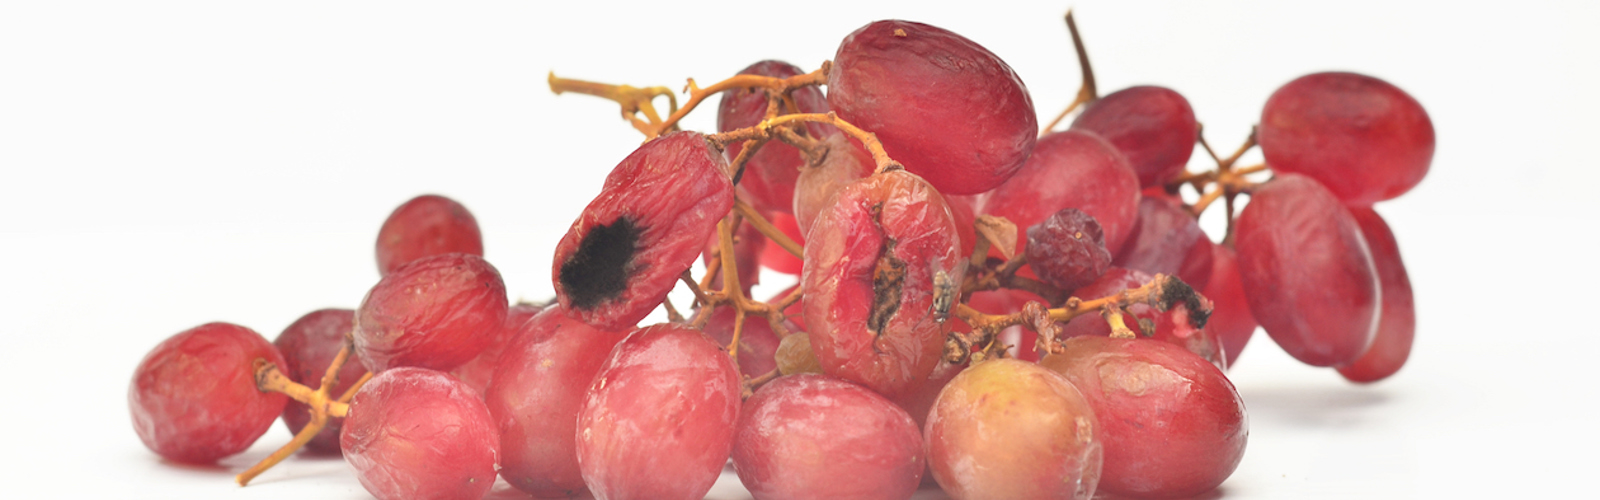 A bunch of grapes, some mouldy, on white background